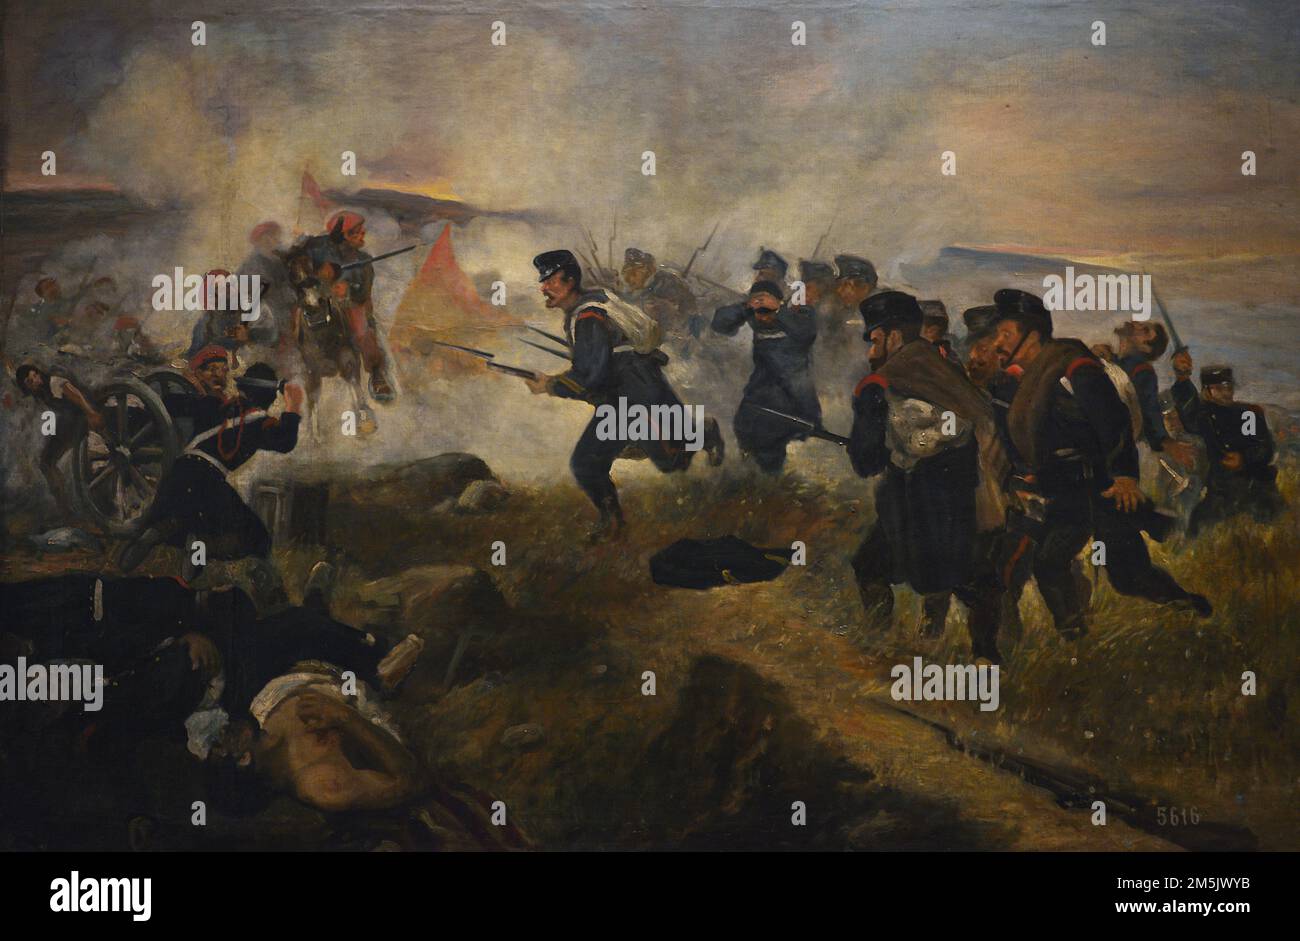 History of Spain. Third Carlist War (1872-1876). Battle of Bocairent or Camorra (December 22, 1873). 'Battle of Bocairente in the Carlist War'. Anonymous. Oil on canvas, 1873. Army Museum. Toledo, Spain. Stock Photo